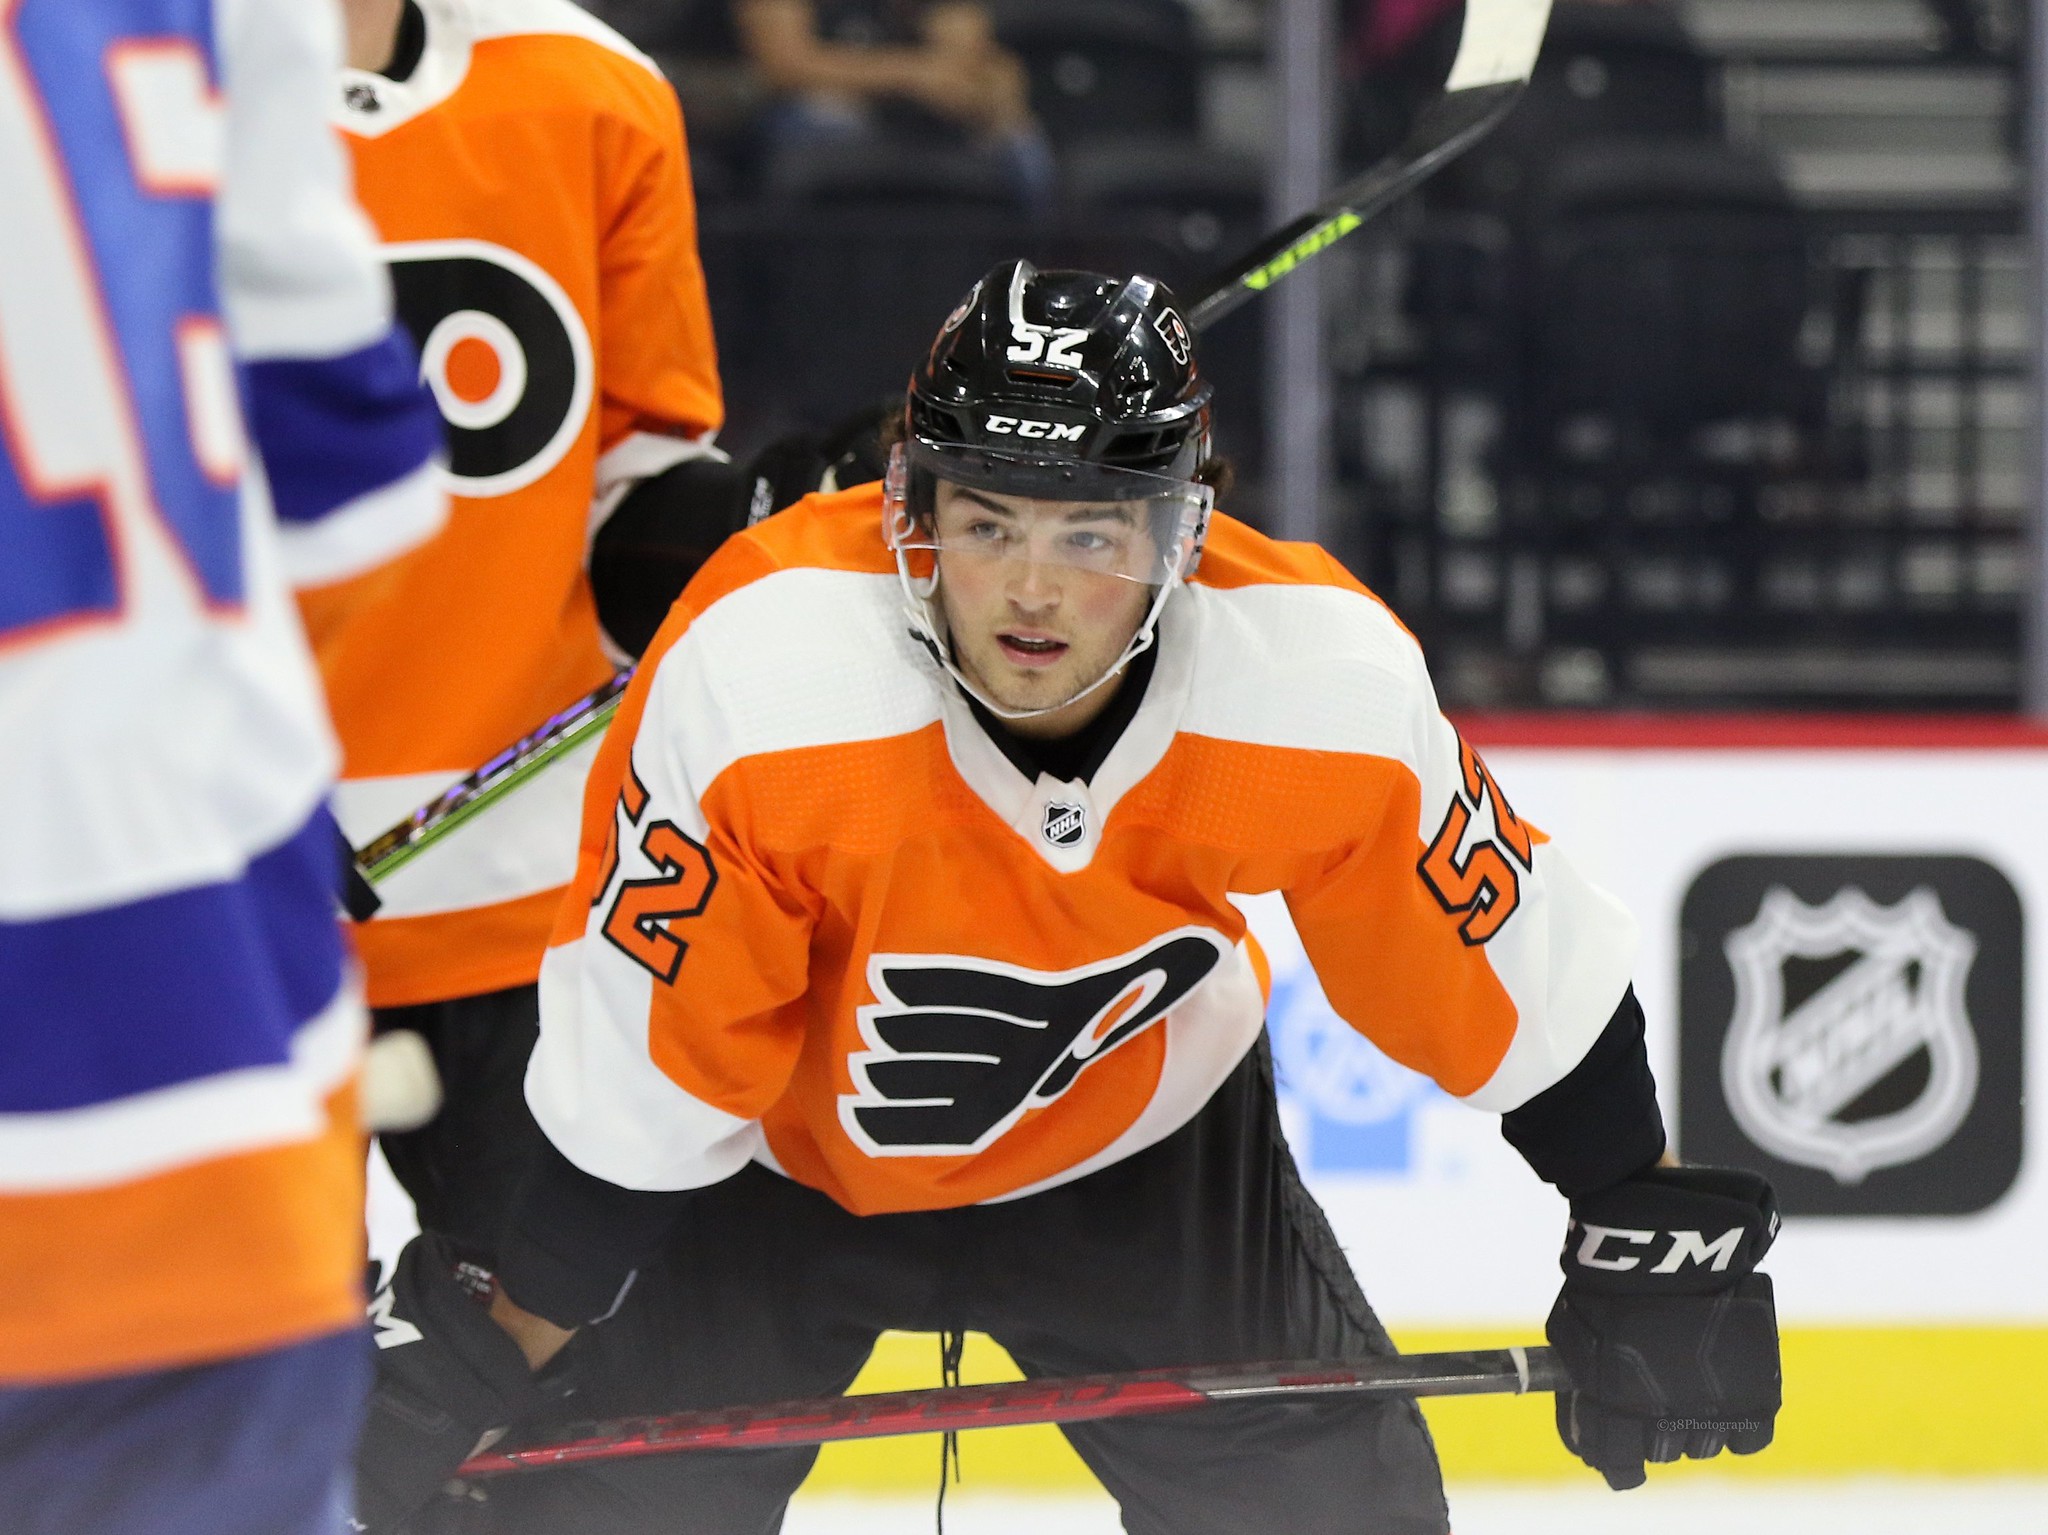 Flyers built to fight, not pushed around under Tortorella